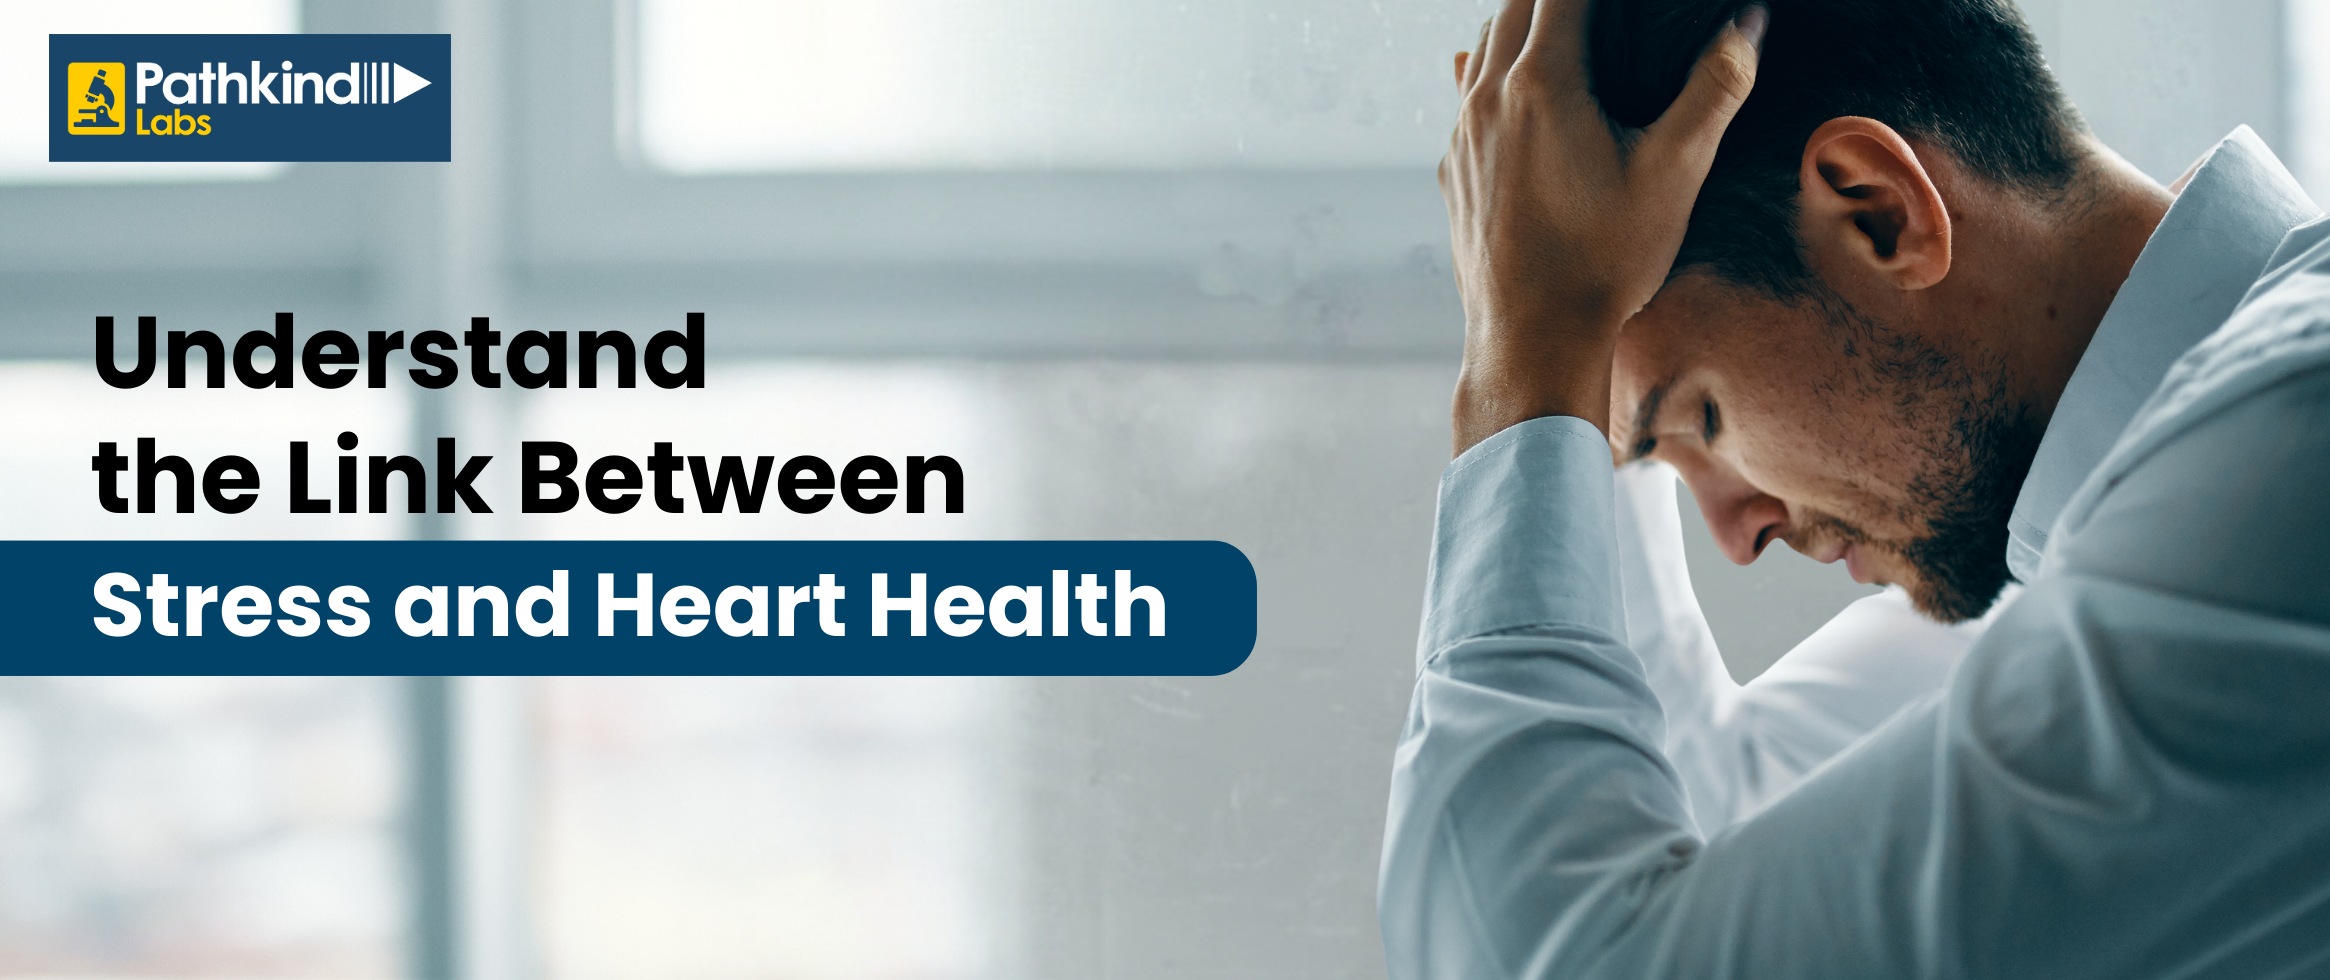 Link Between Stress and Heart Health